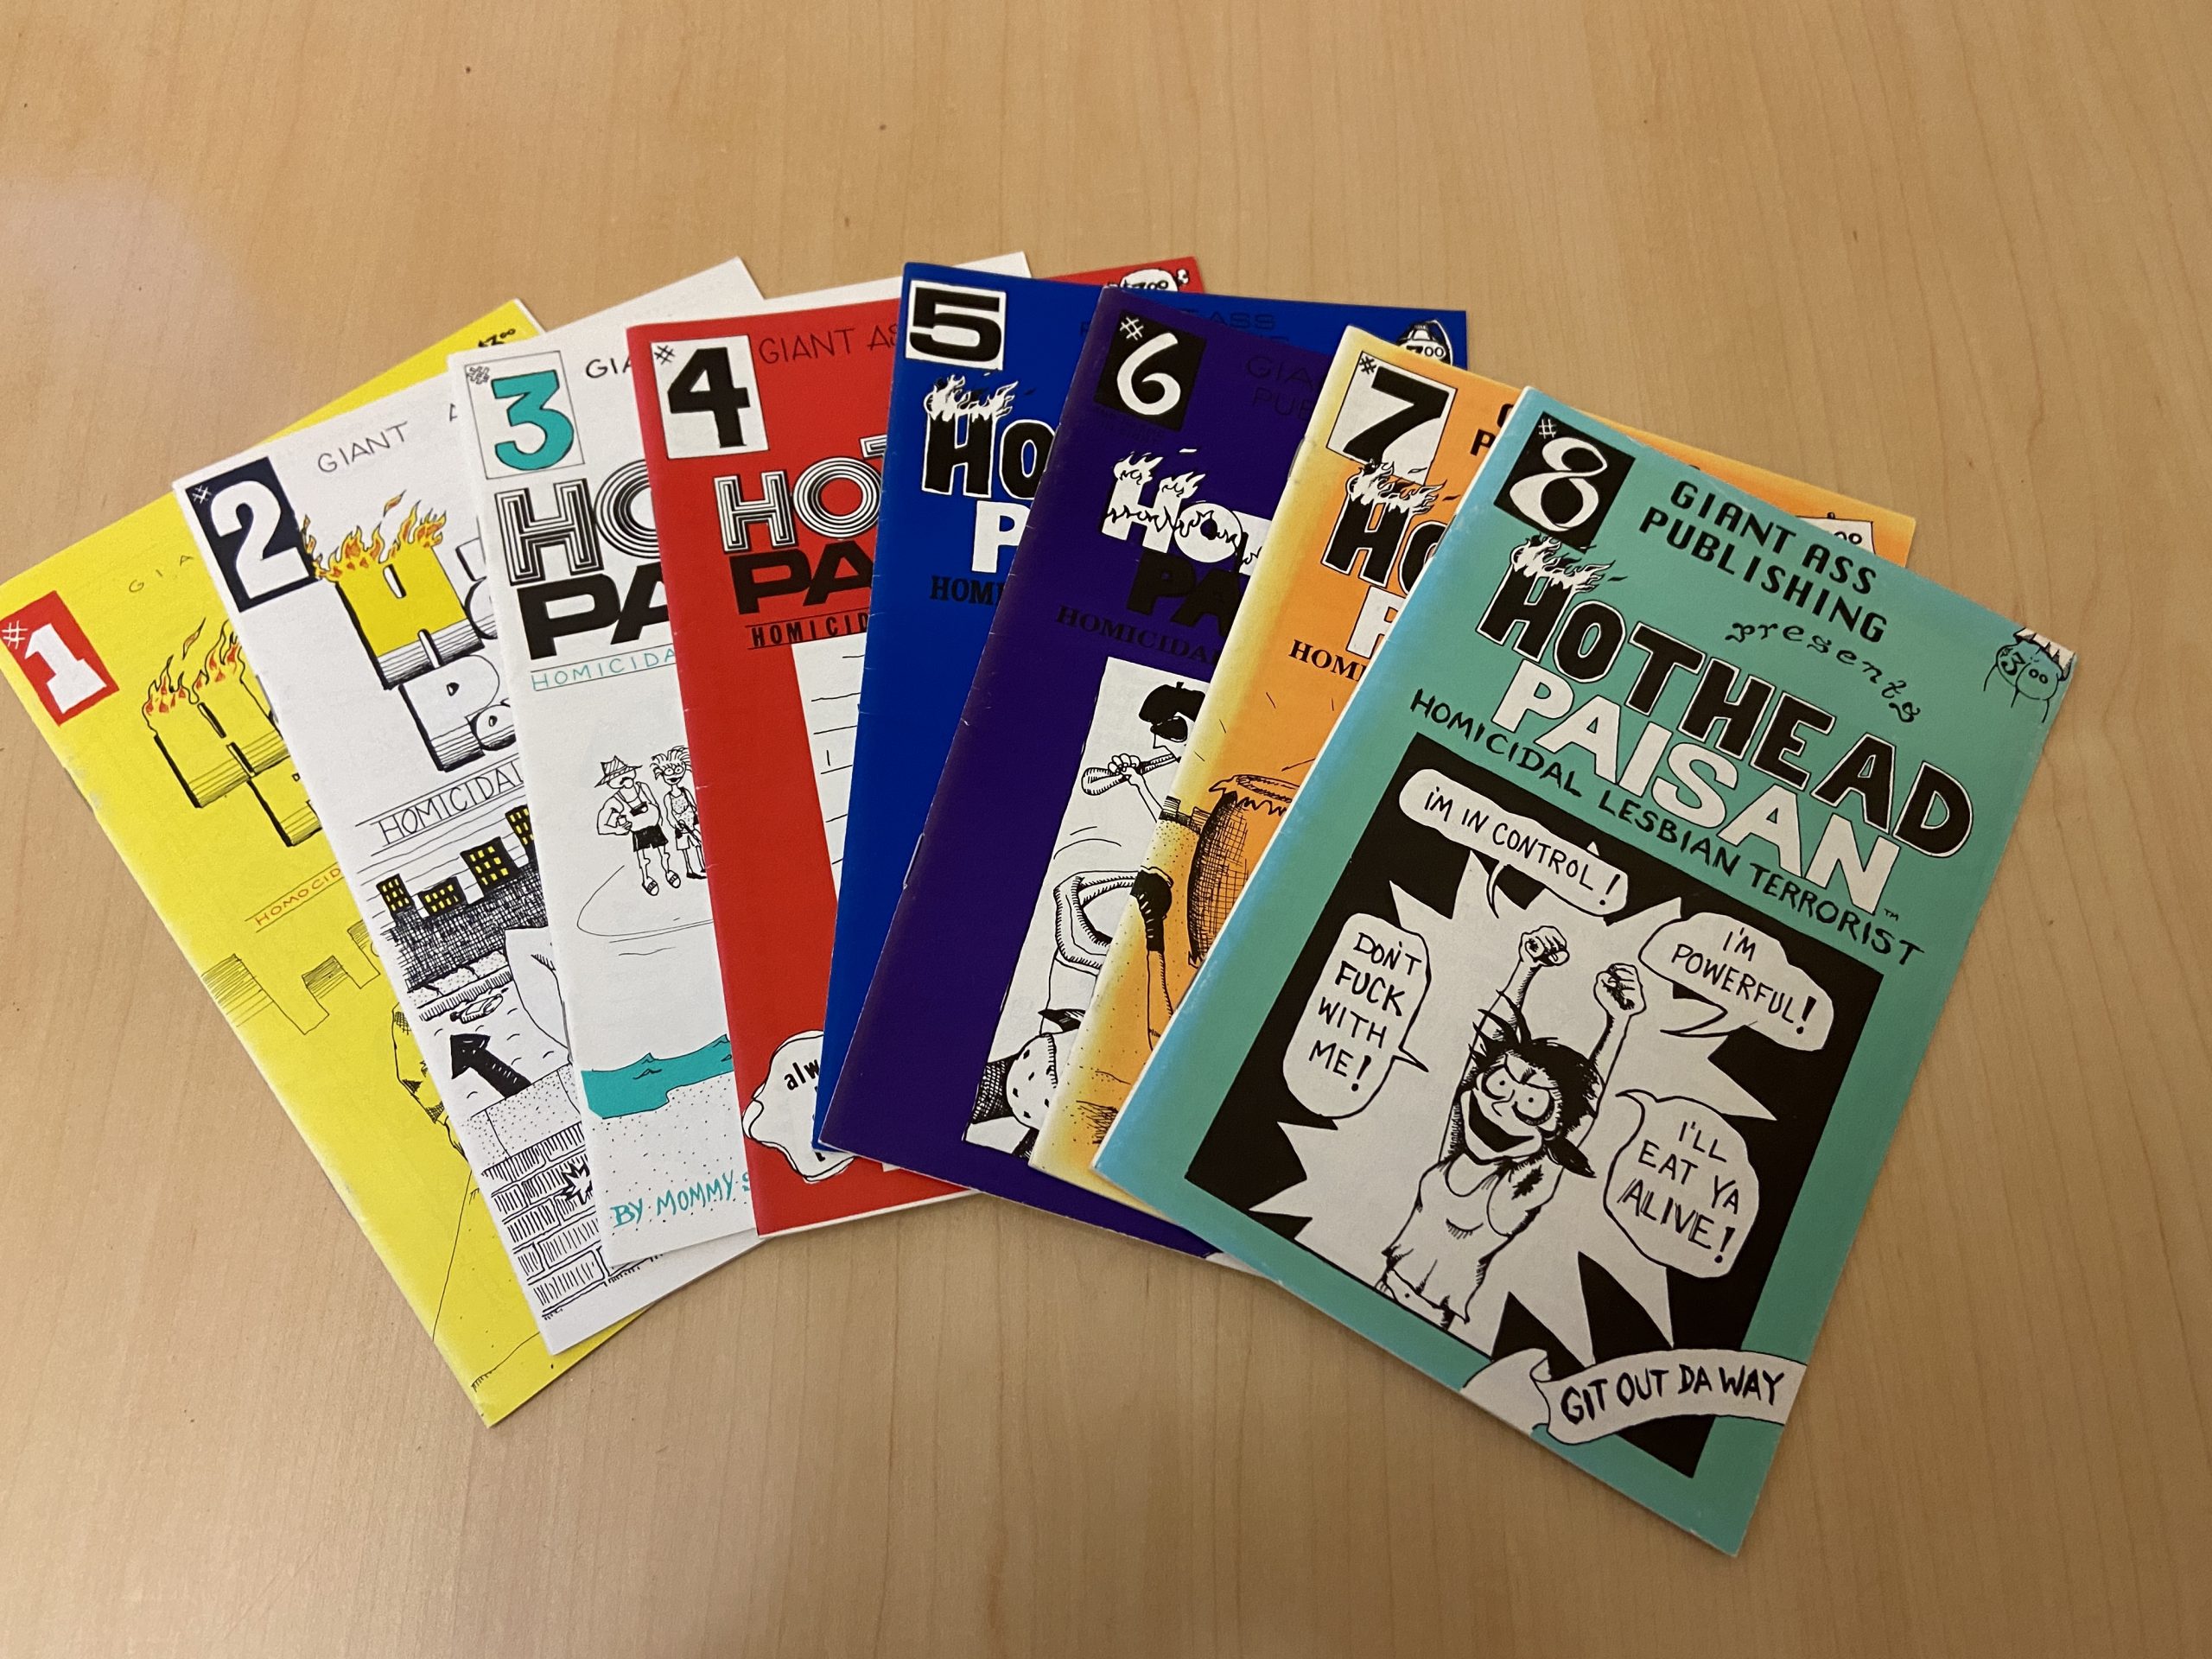 Multiple books with the title "HOTHEAD PAISAN".